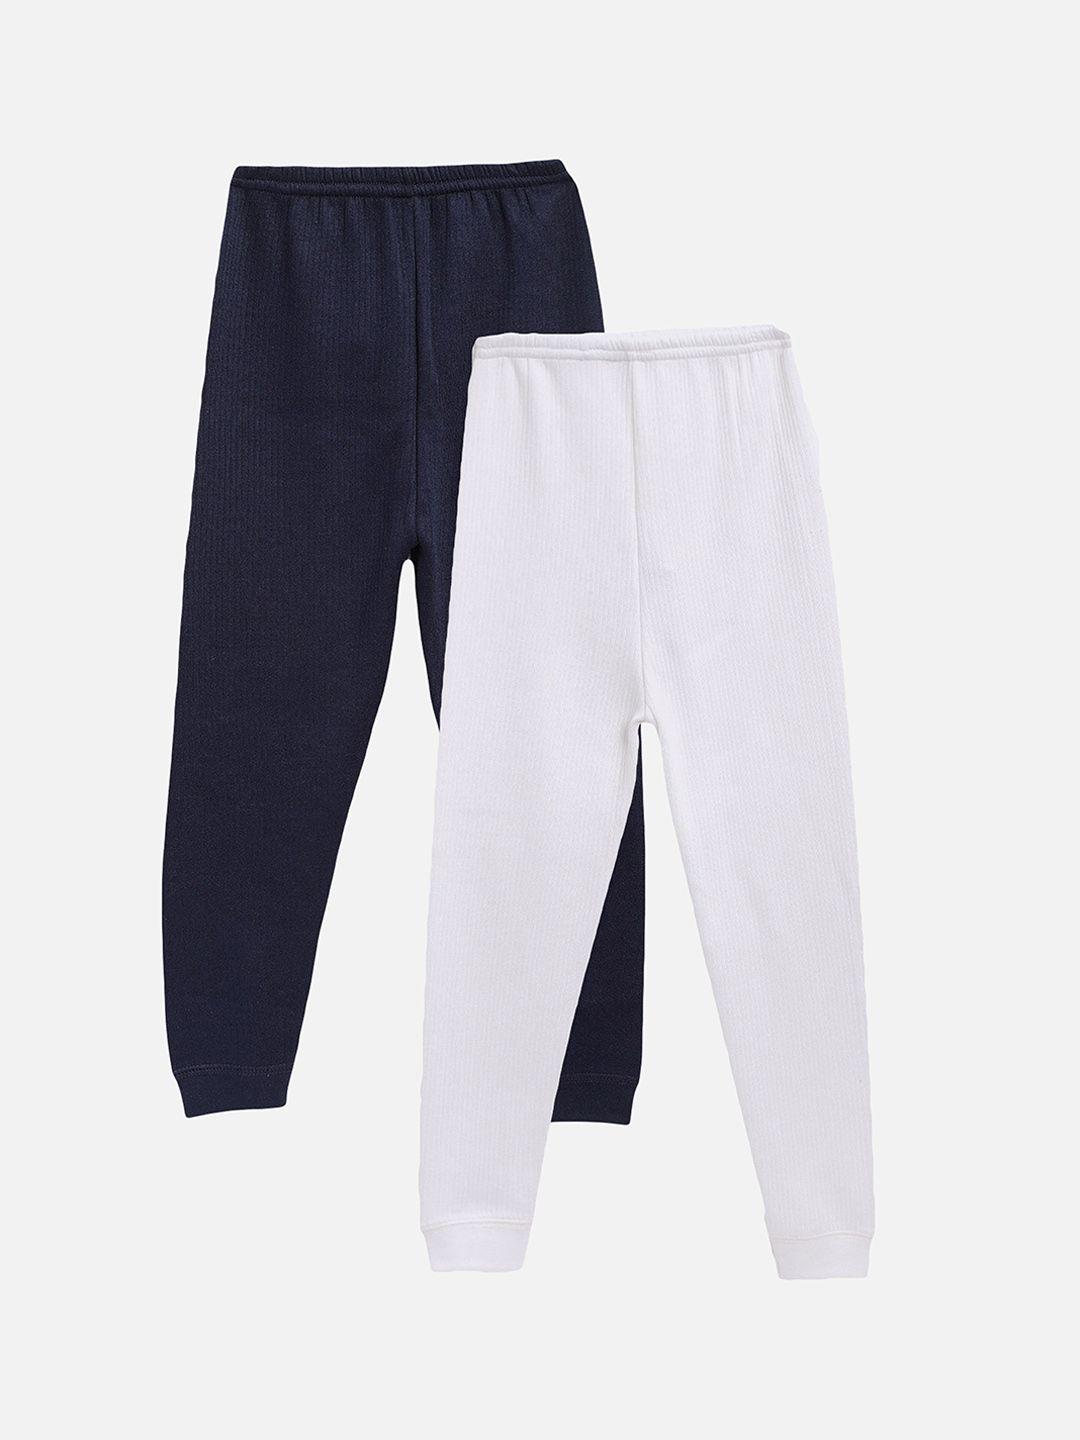 kanvin boys pack of 2 navy blue & white thermal bottoms